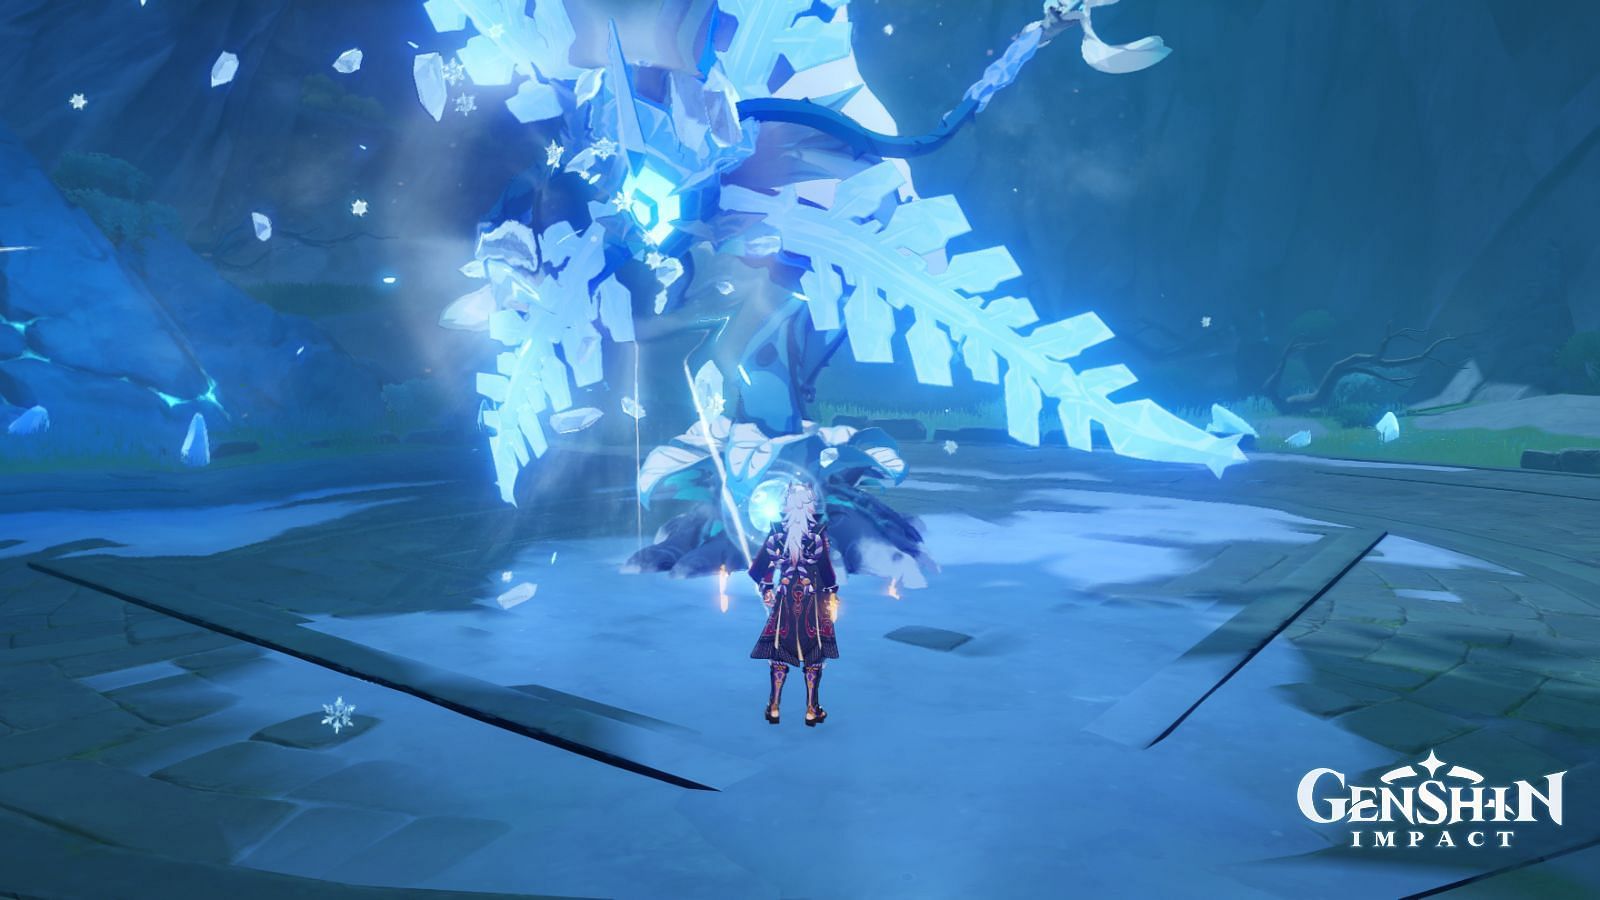 Hoarfrost Core can be obtained by defeating Cryo Regisvine (Image via Genshin Impact)